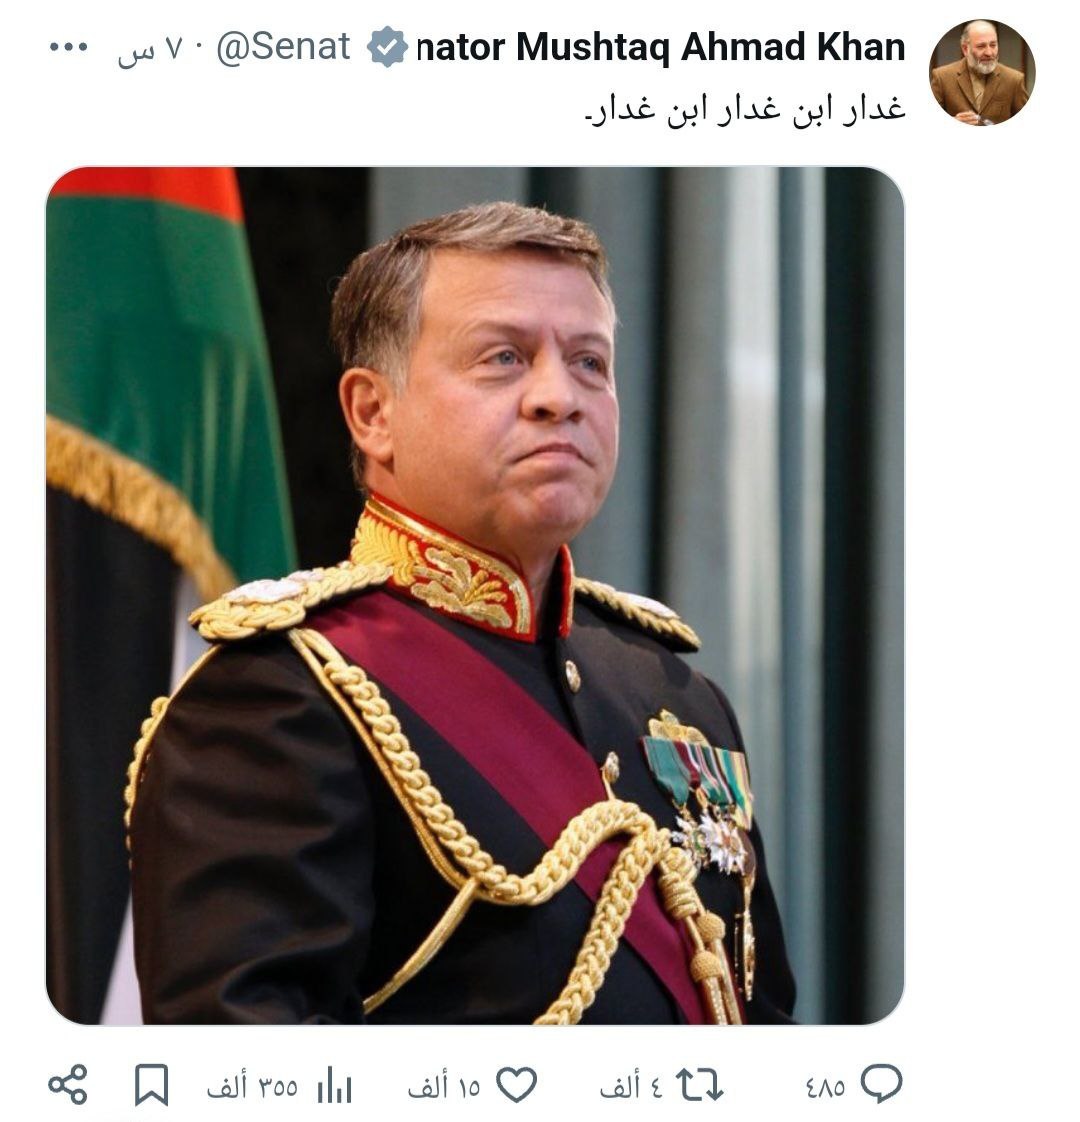 A member of the Pakistani Parliament called the King of Jordan a traitor for helping Israel to intercept Iranian drones